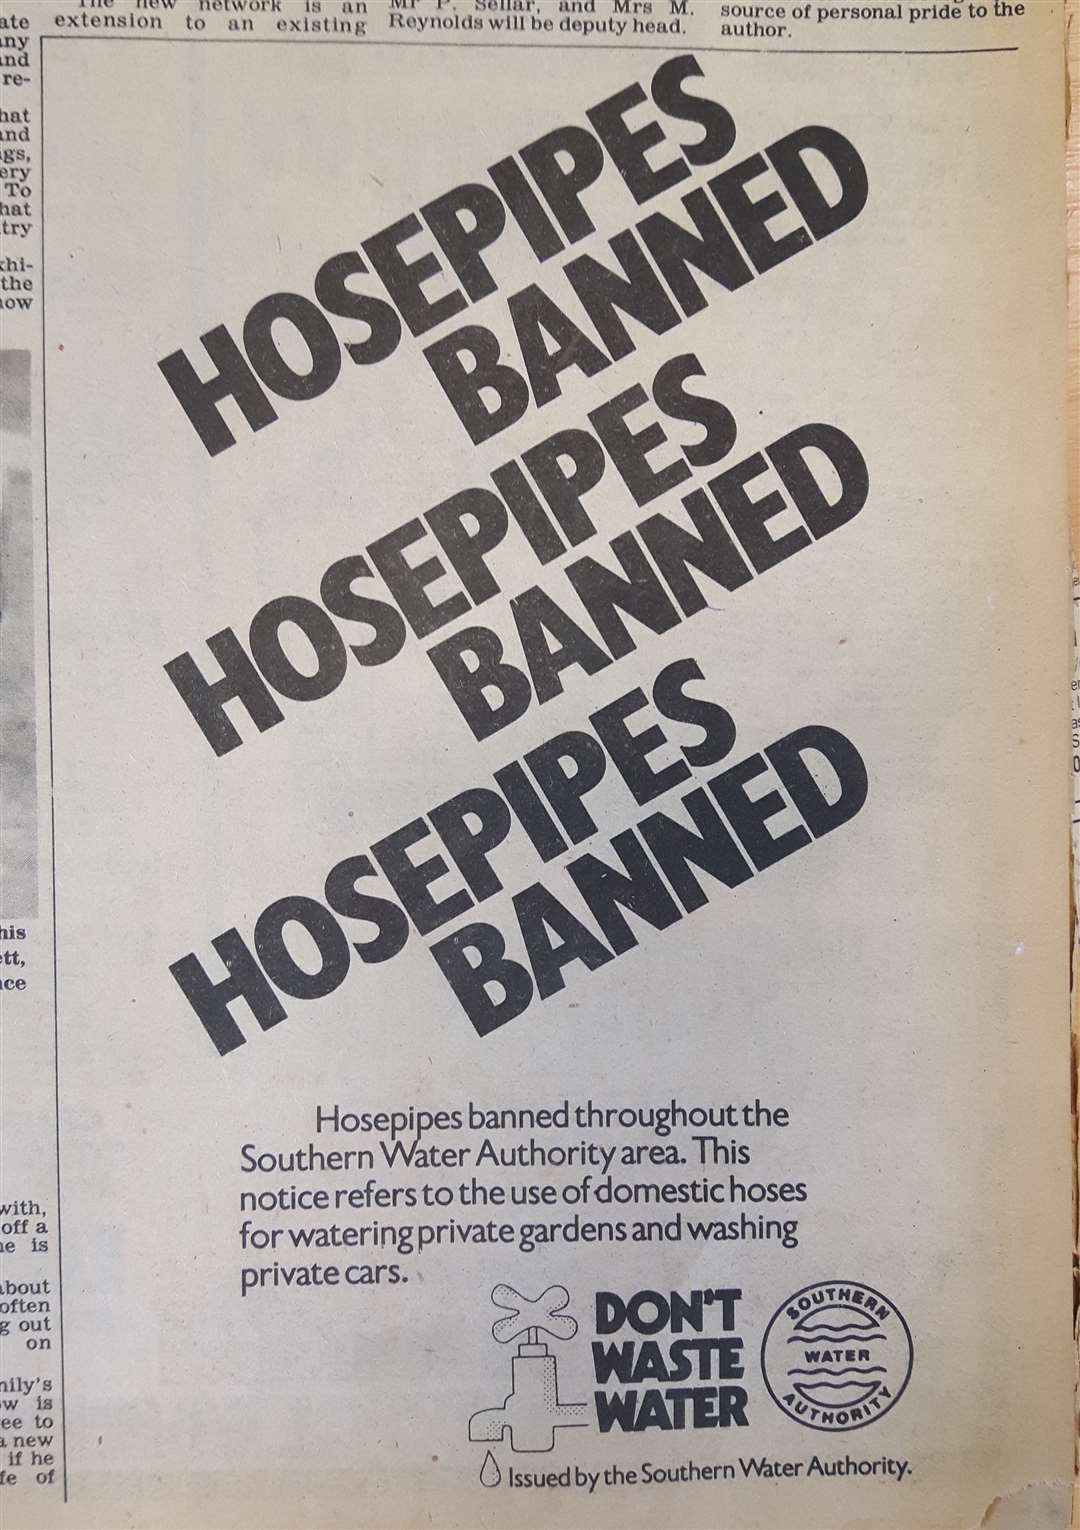 Hosepipe bans were promoted with these newspaper adverts